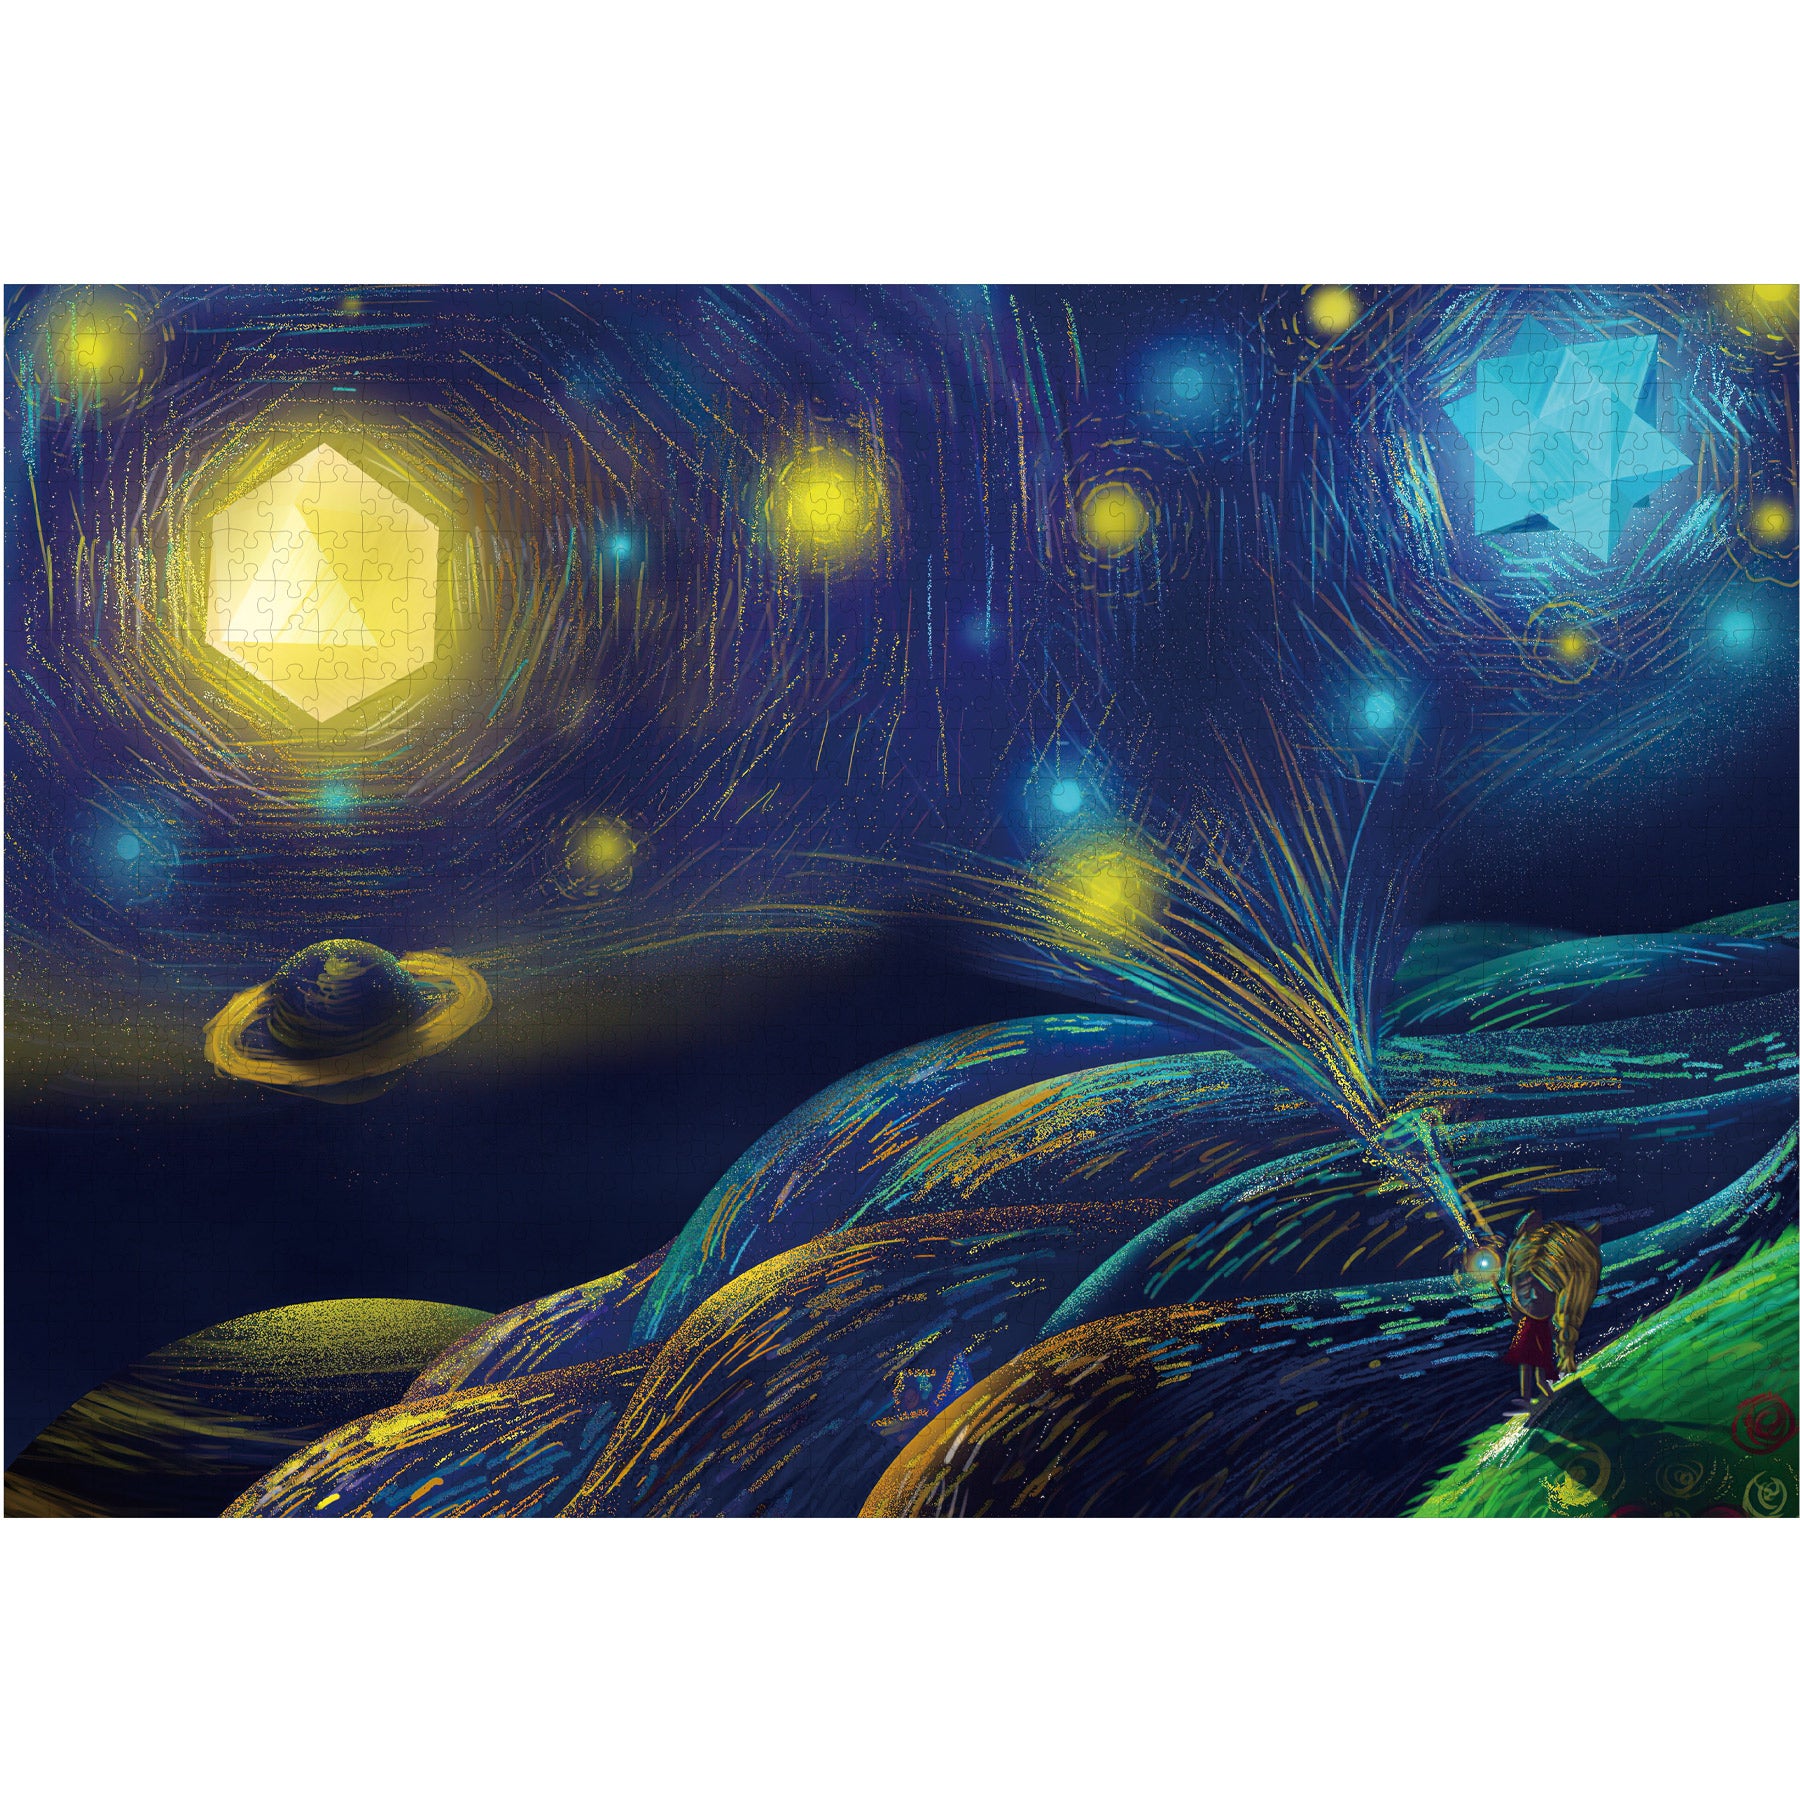 jigsaw puzzles for adults 2000 piece - Starry Night - No letters on back -  Not for beginners - modern